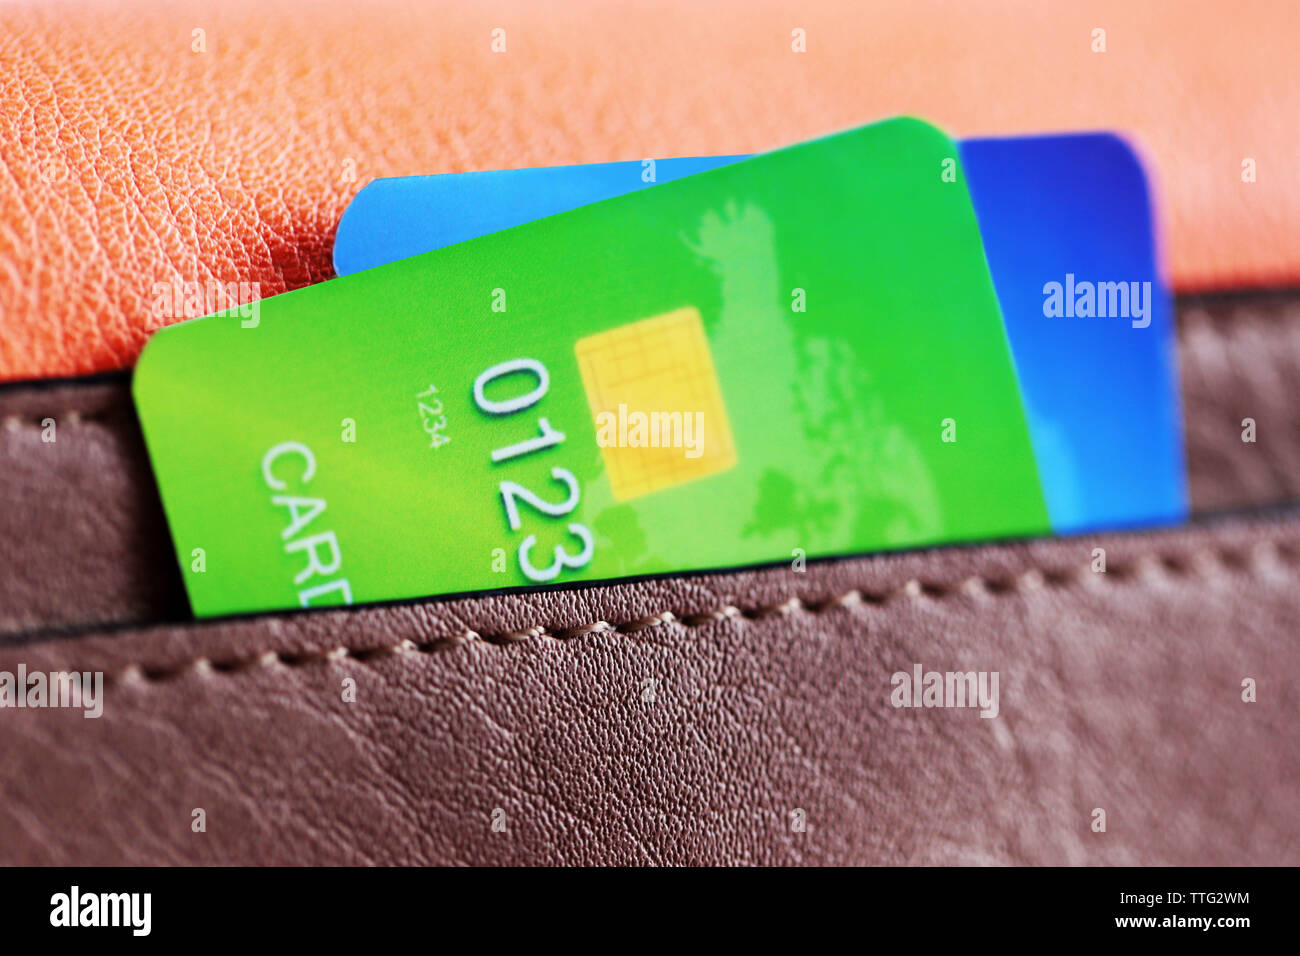 Credit cards in brown bag pocket, close up Stock Photo